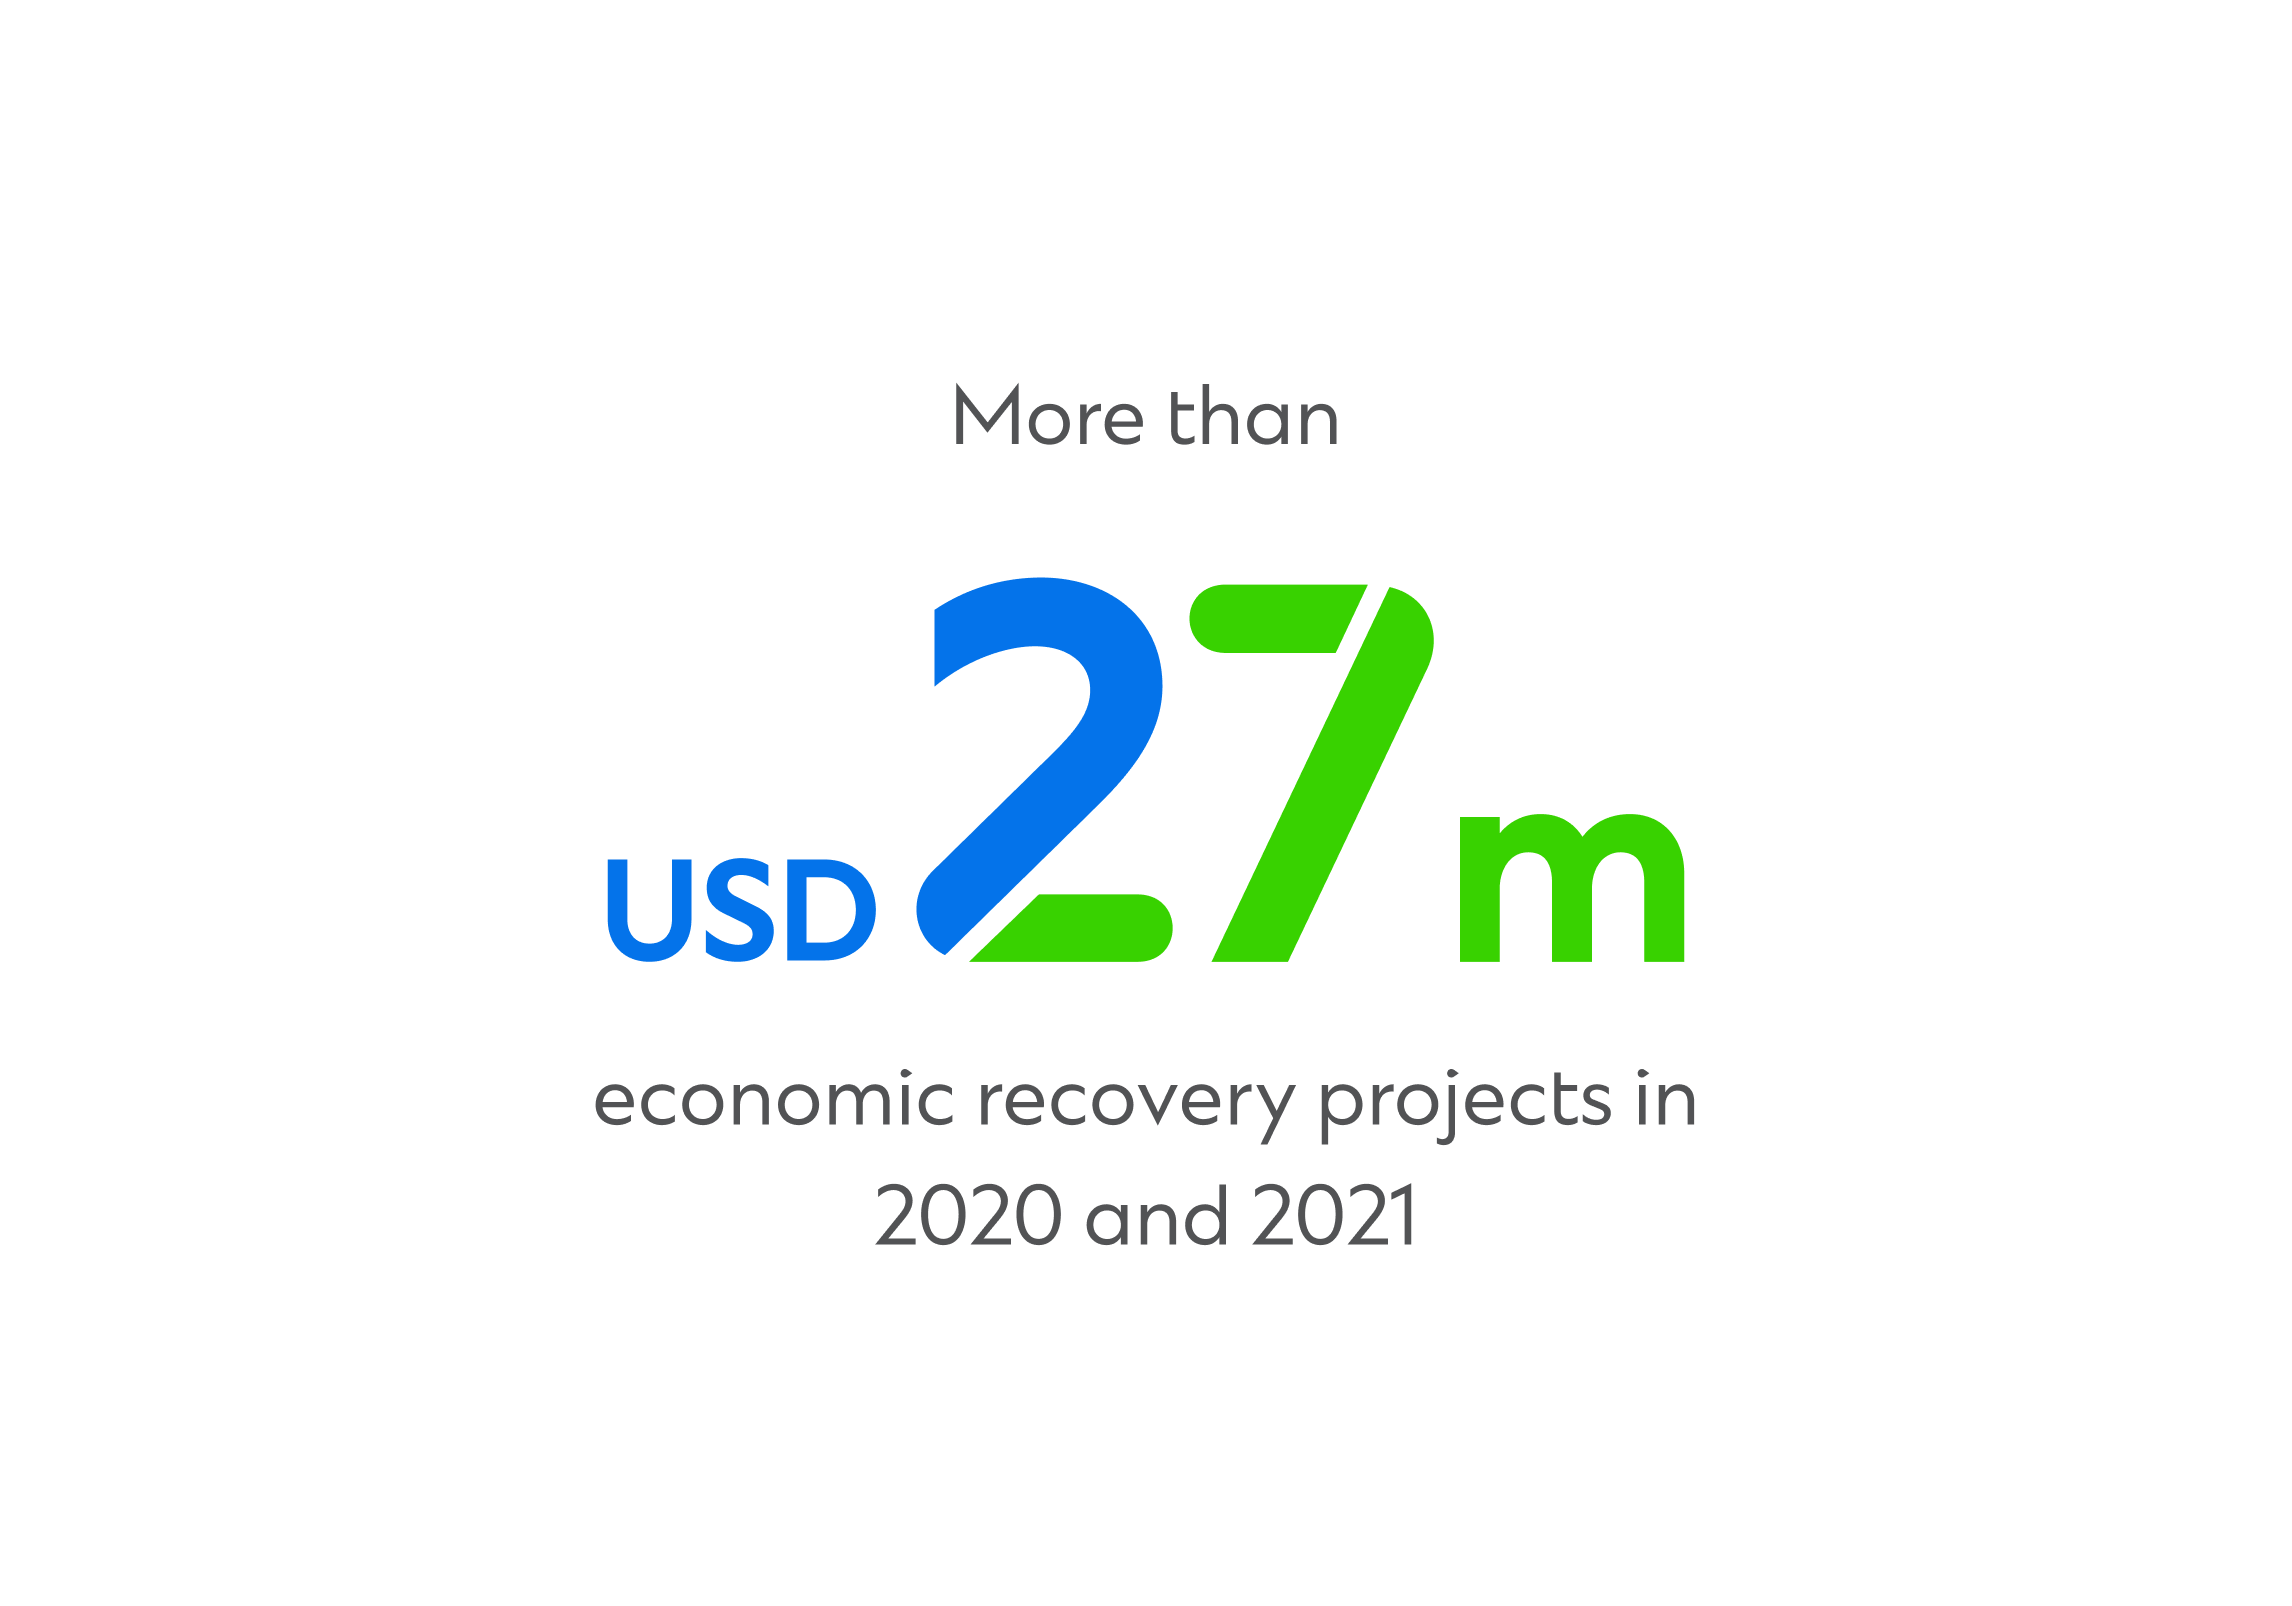 More than USD 27m economic recovery projects in 2020 and 2021